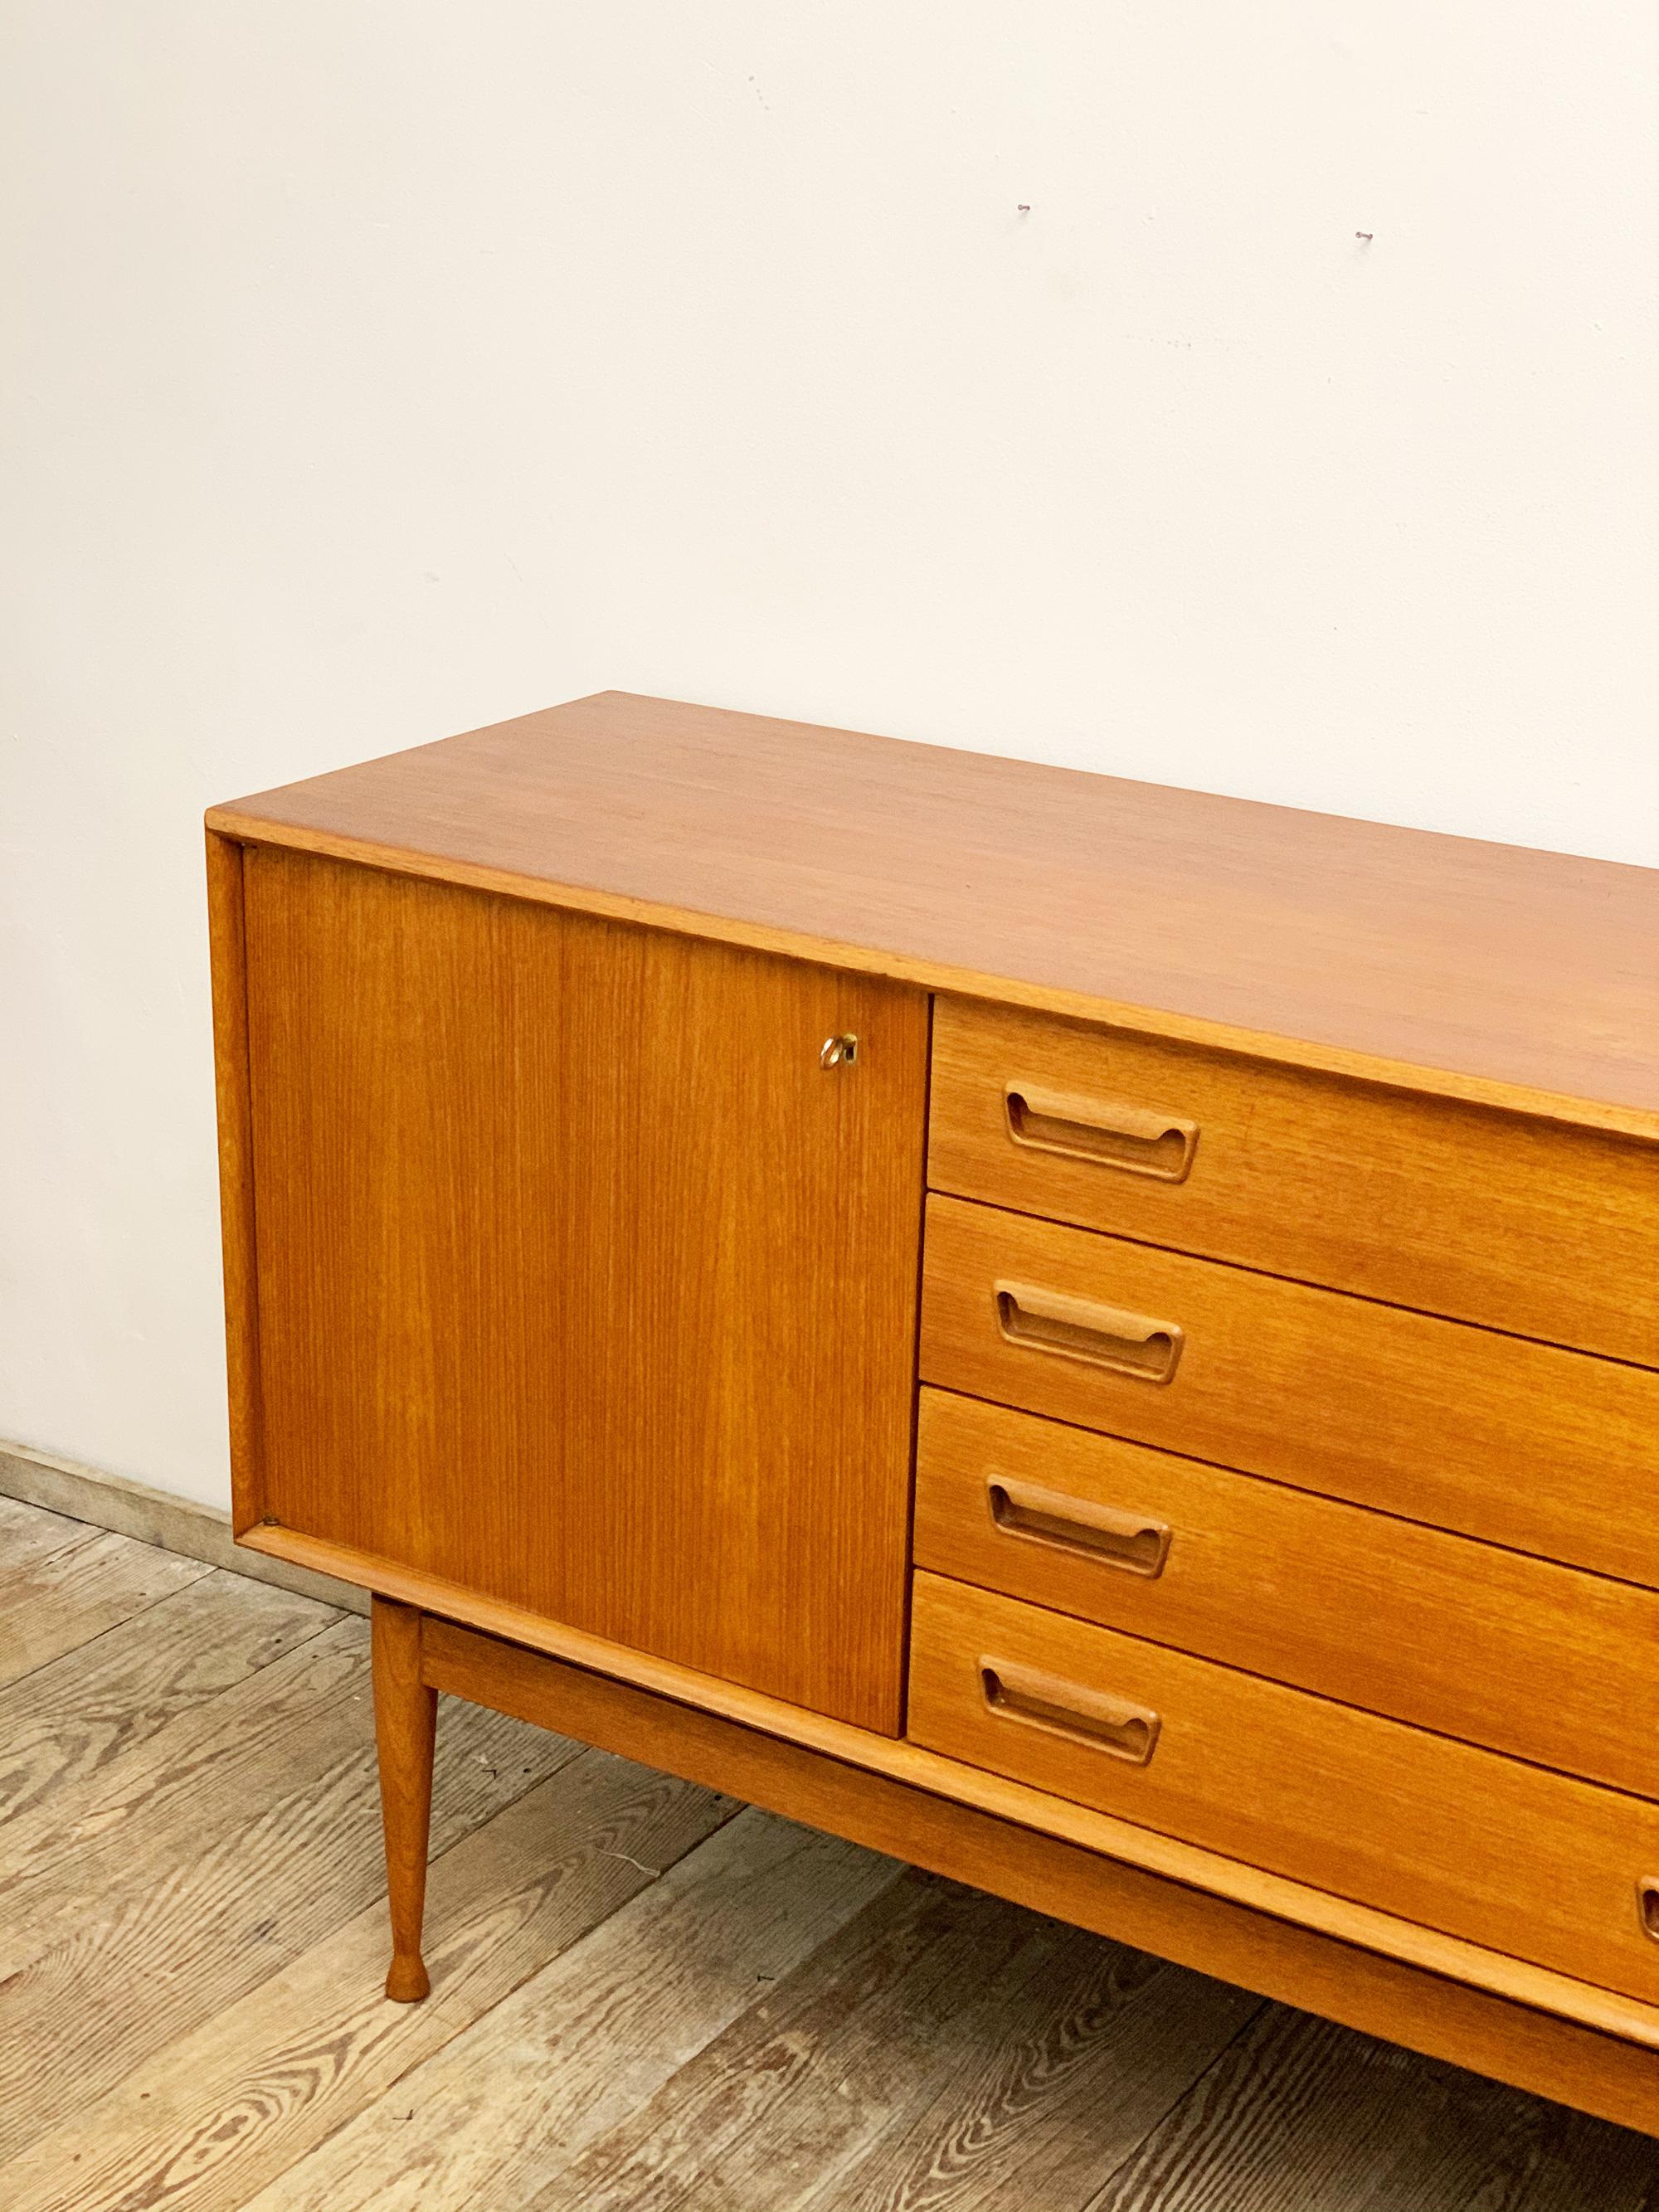 Mid-20th Century Danish Mid-Century Teak Sideboard or Credenza with Sculpted Legs, Denmark, 1950s